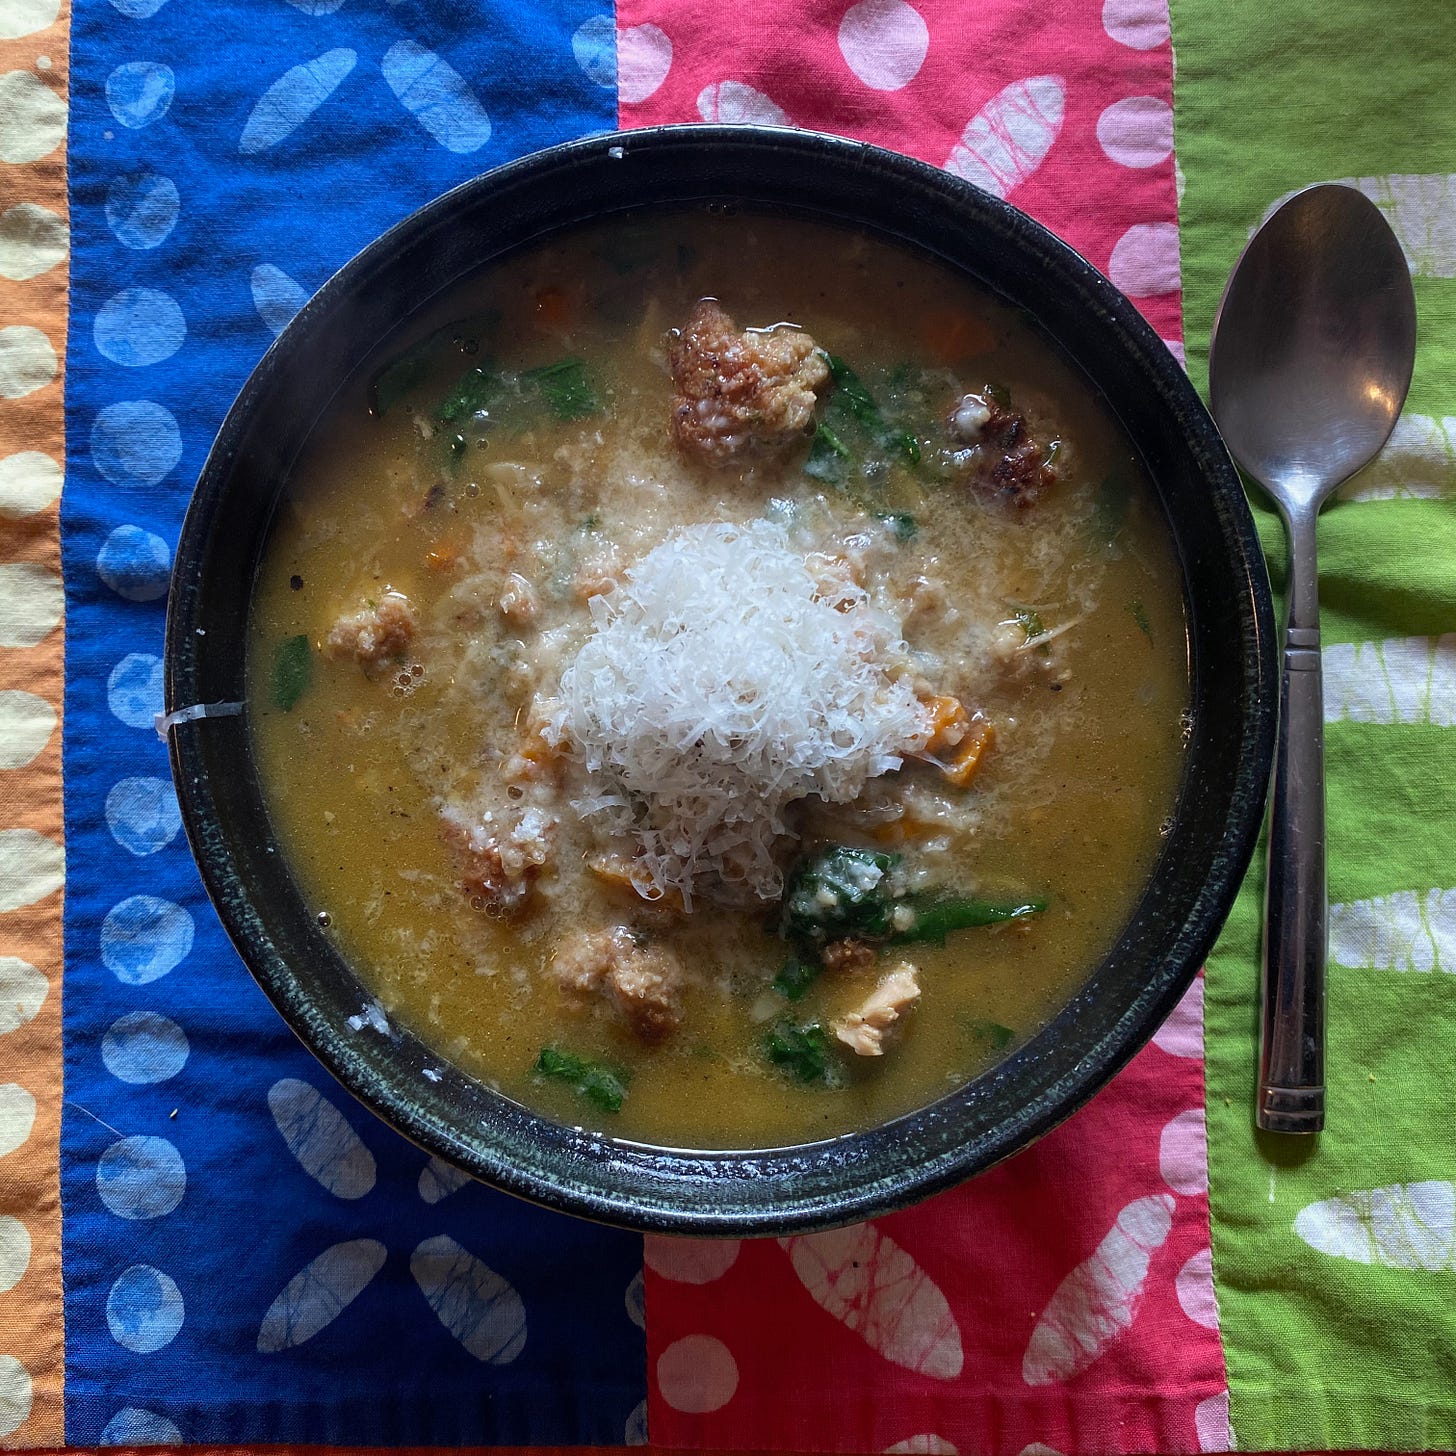 A ceramic bowl of soup, piled with grated Parmesan, on a colorful placemat.